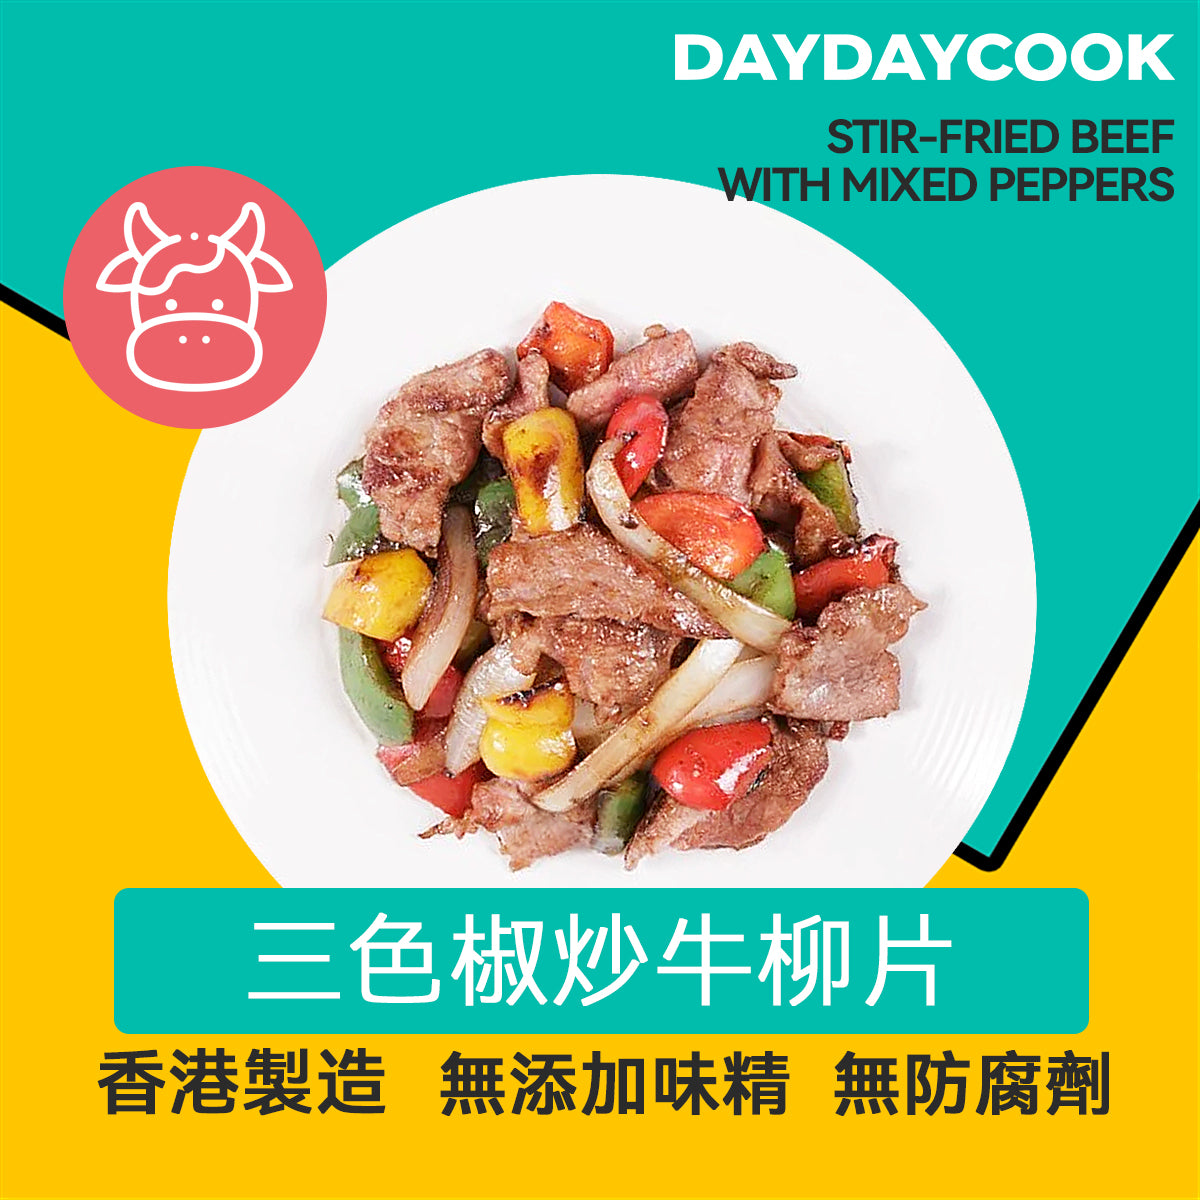 Stir-Fried Beef with Mixed Peppers